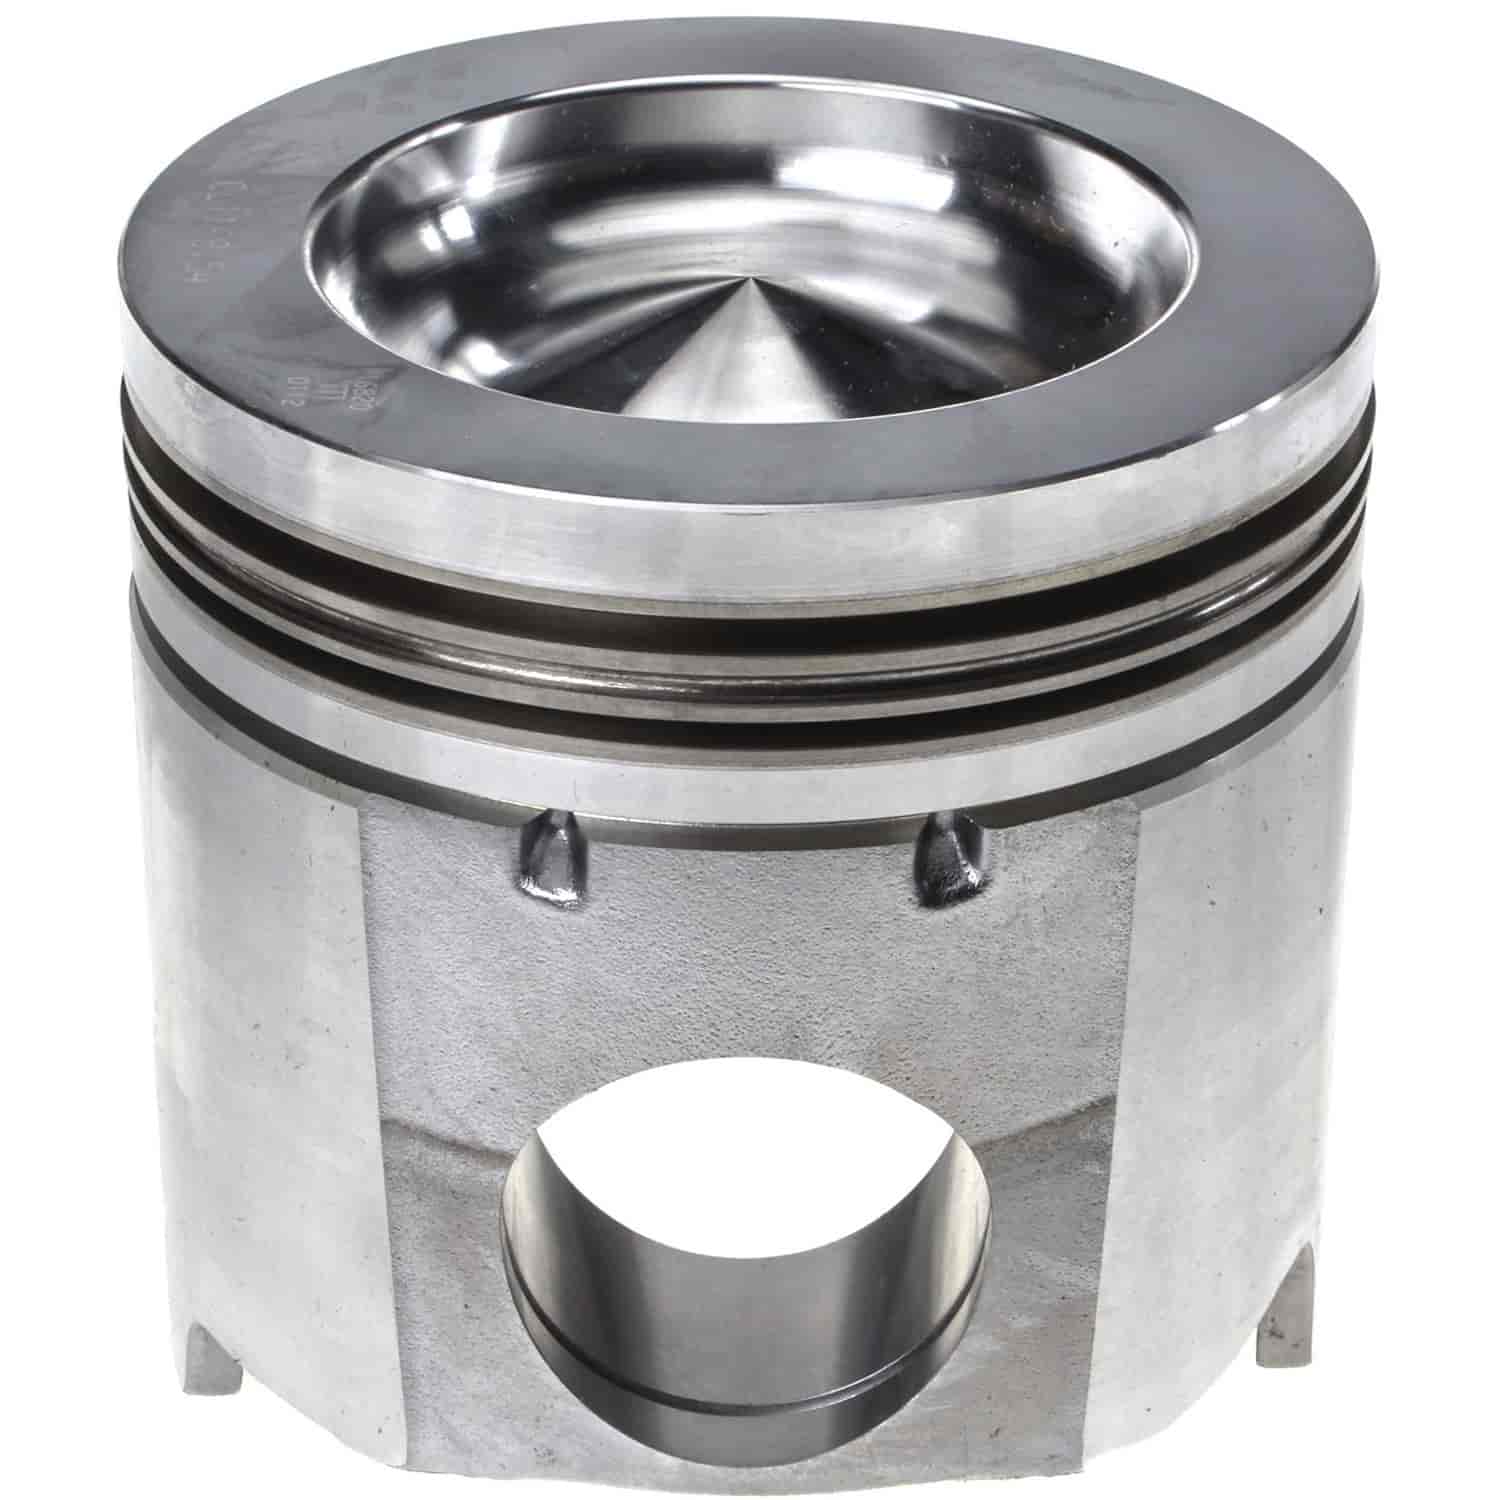 Piston Without Piston Pin Caterpillar 3406C 15.9 1 Compression Ratio Gallery Cooled